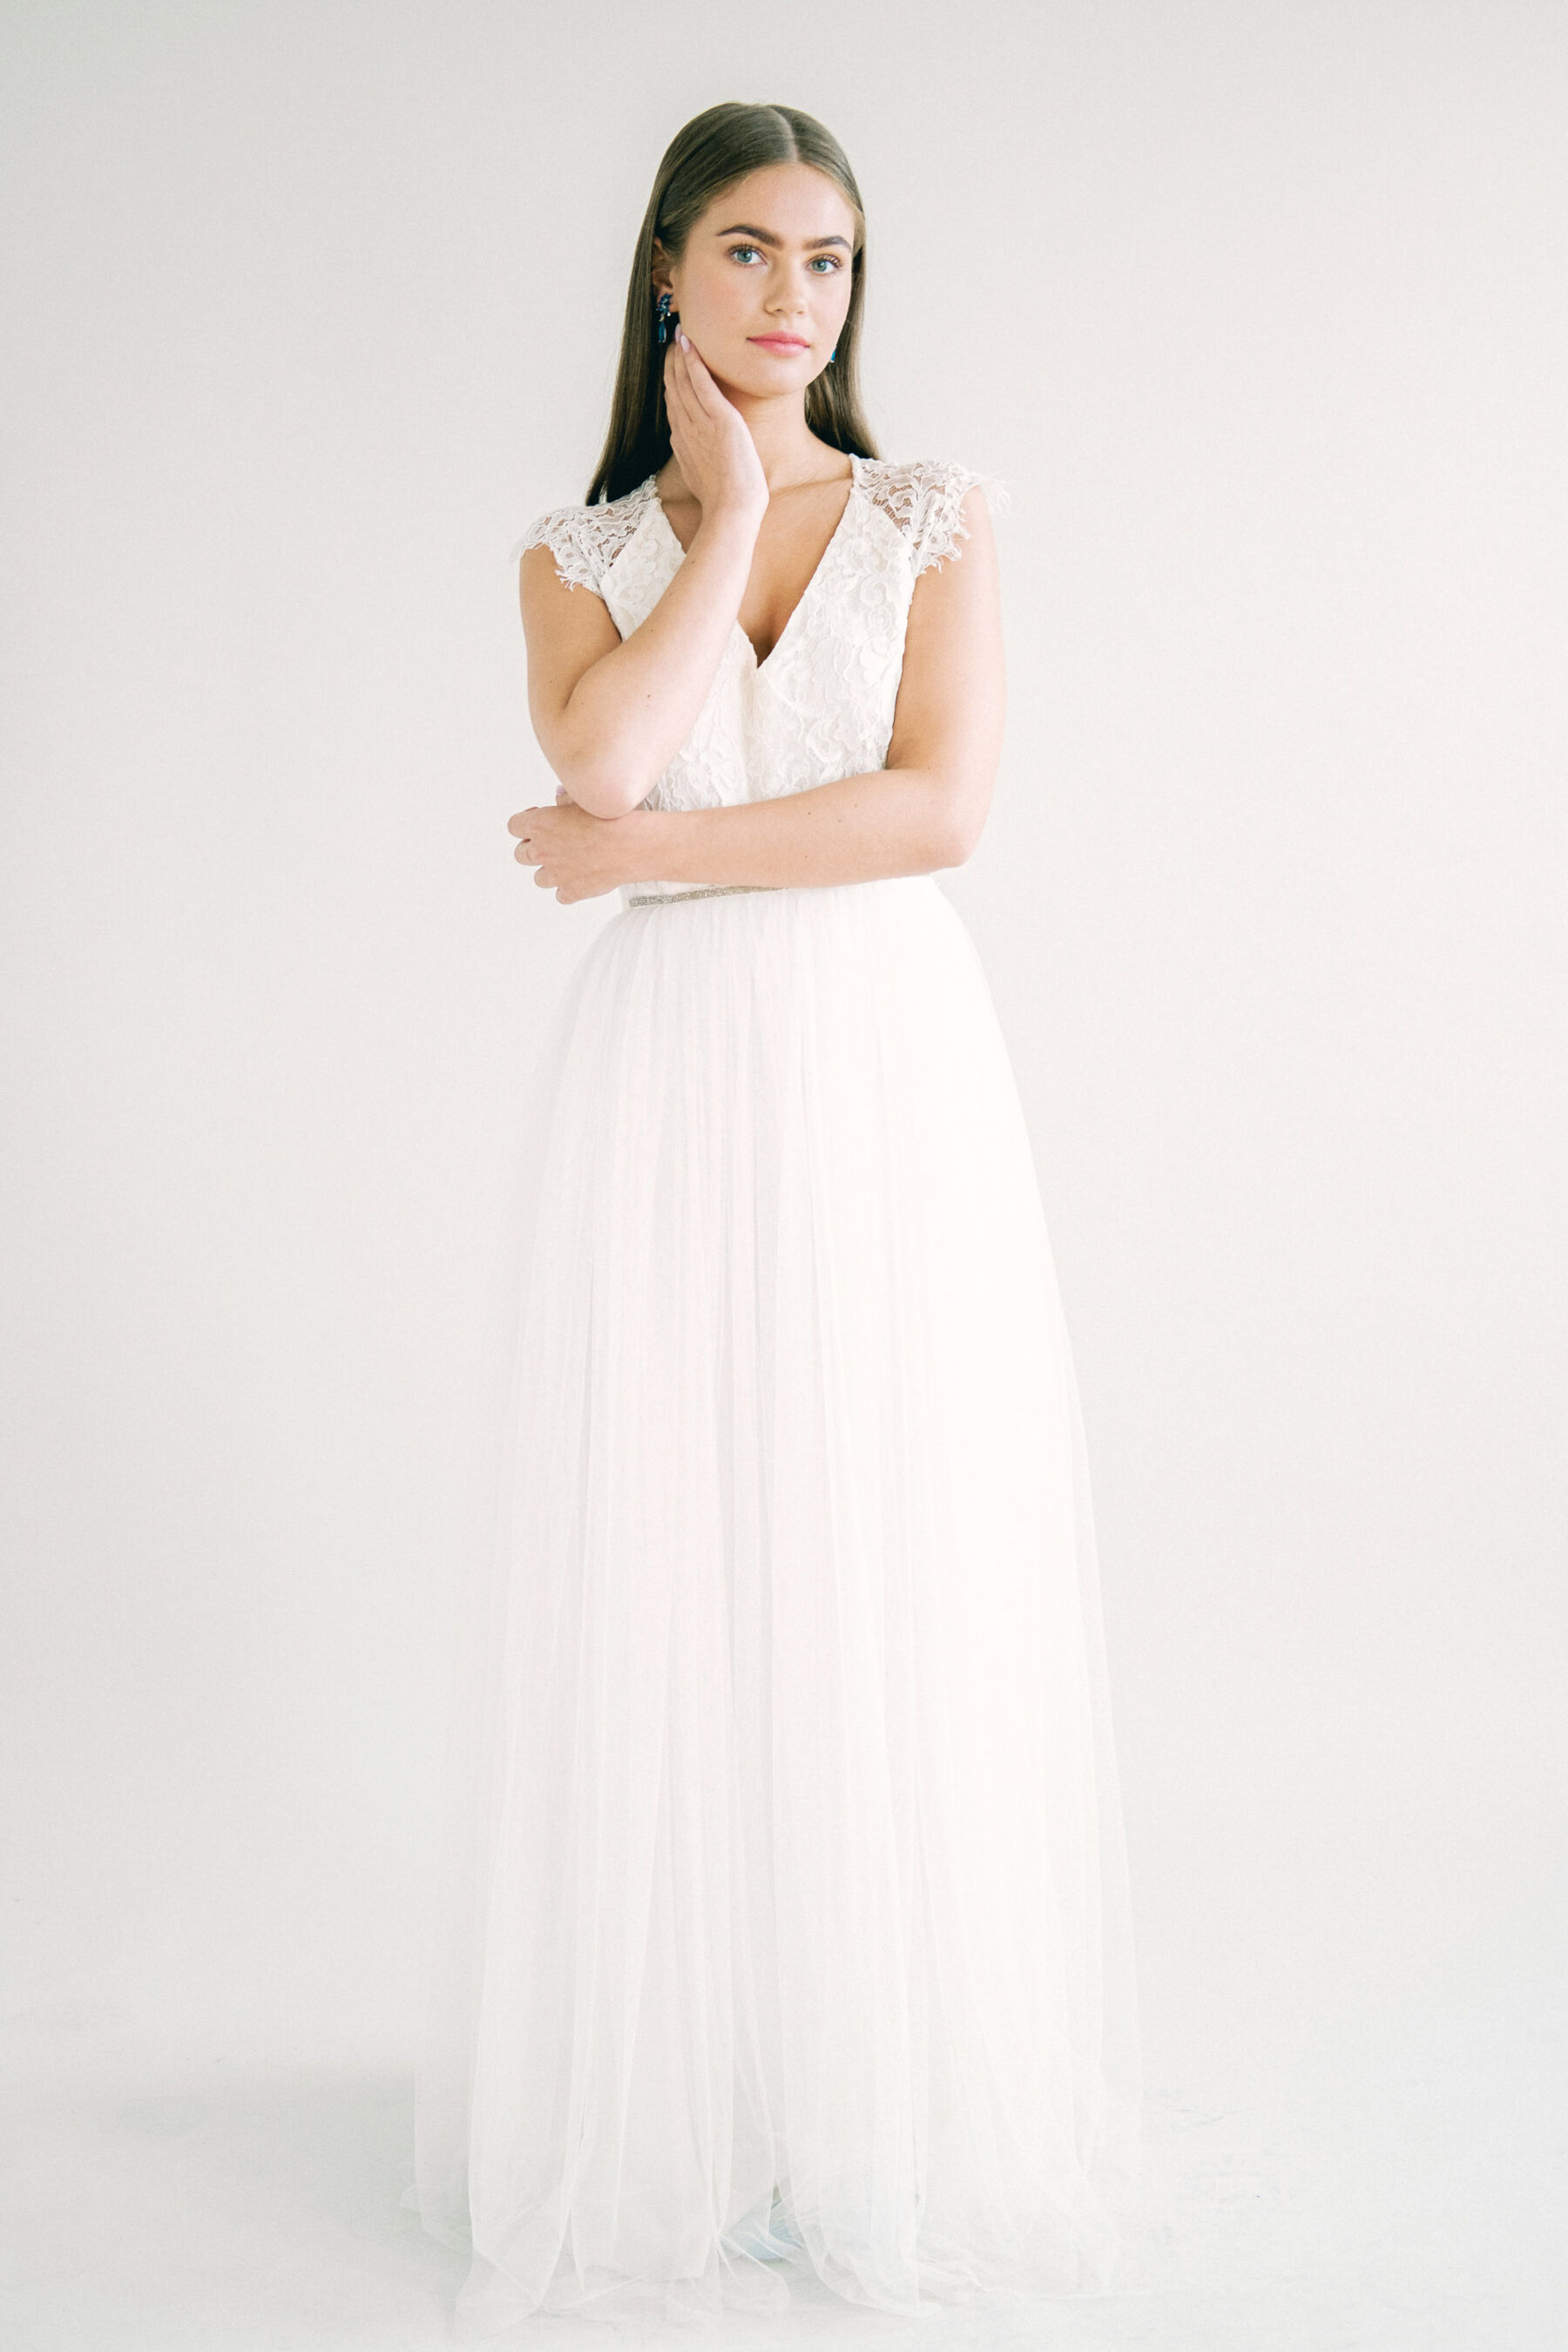 Kate Beaumont ethical wedding dress with lace capped sleeves.